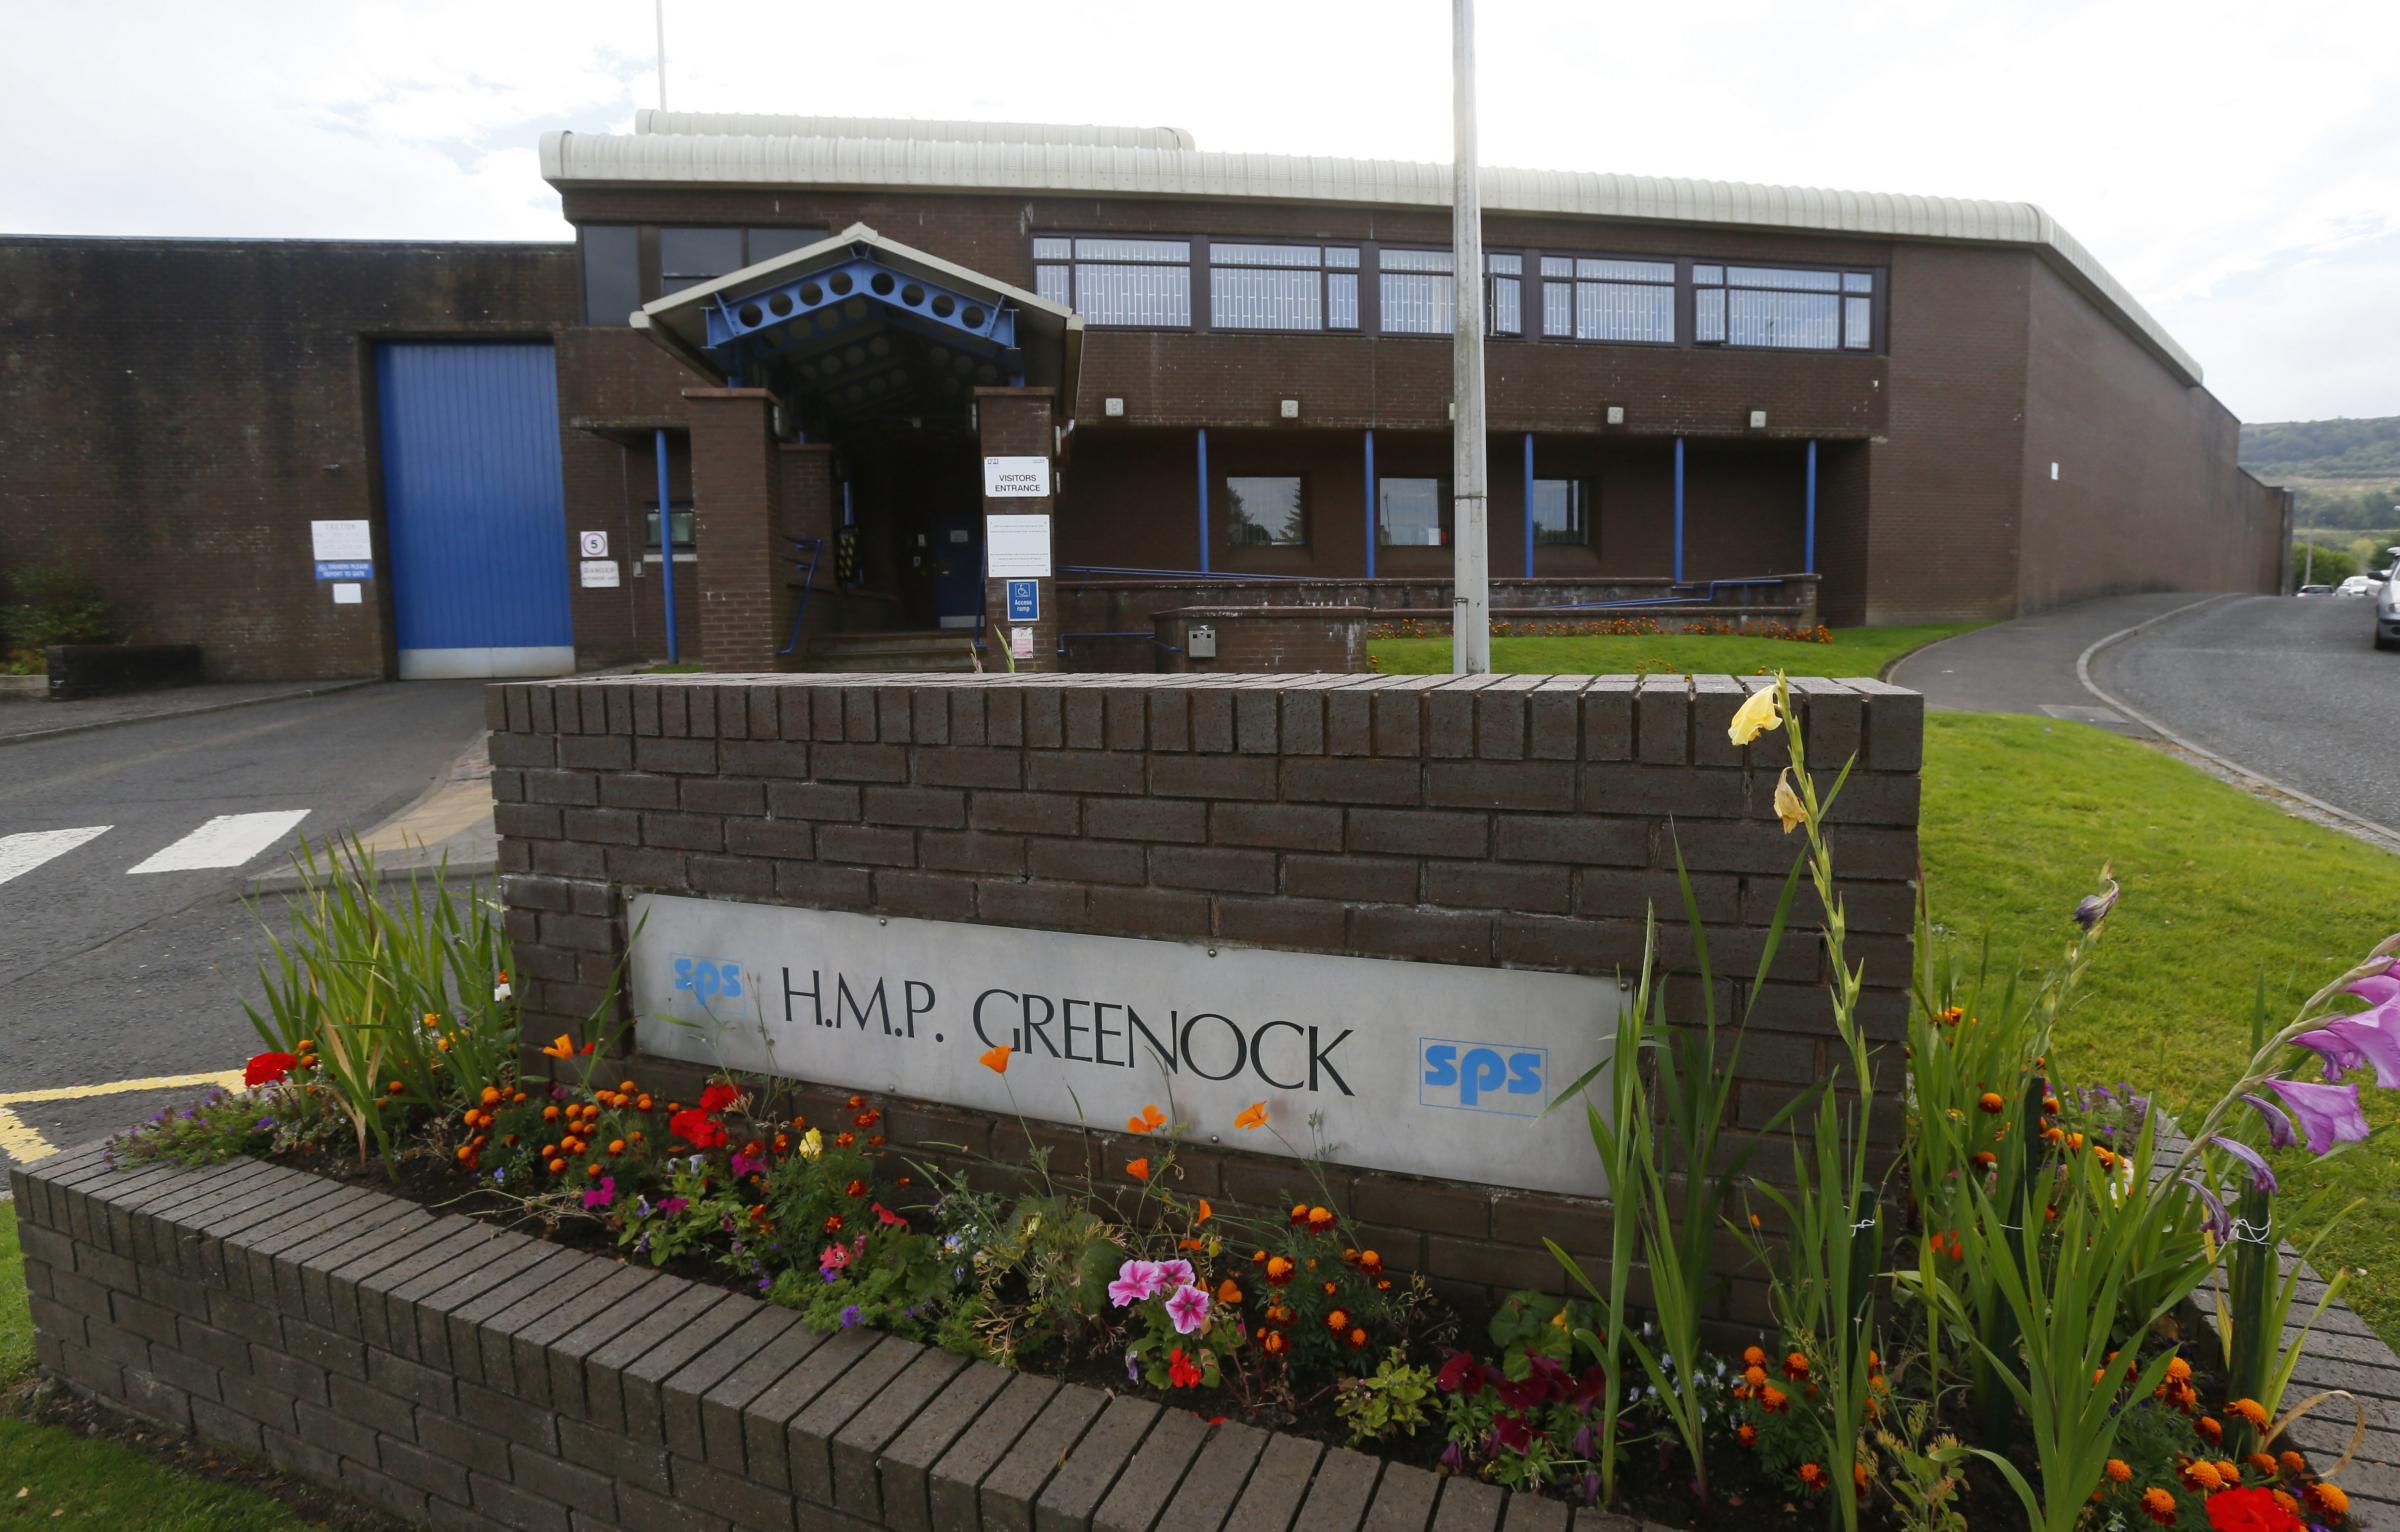 Man charged with punch attack at Greenock Prison